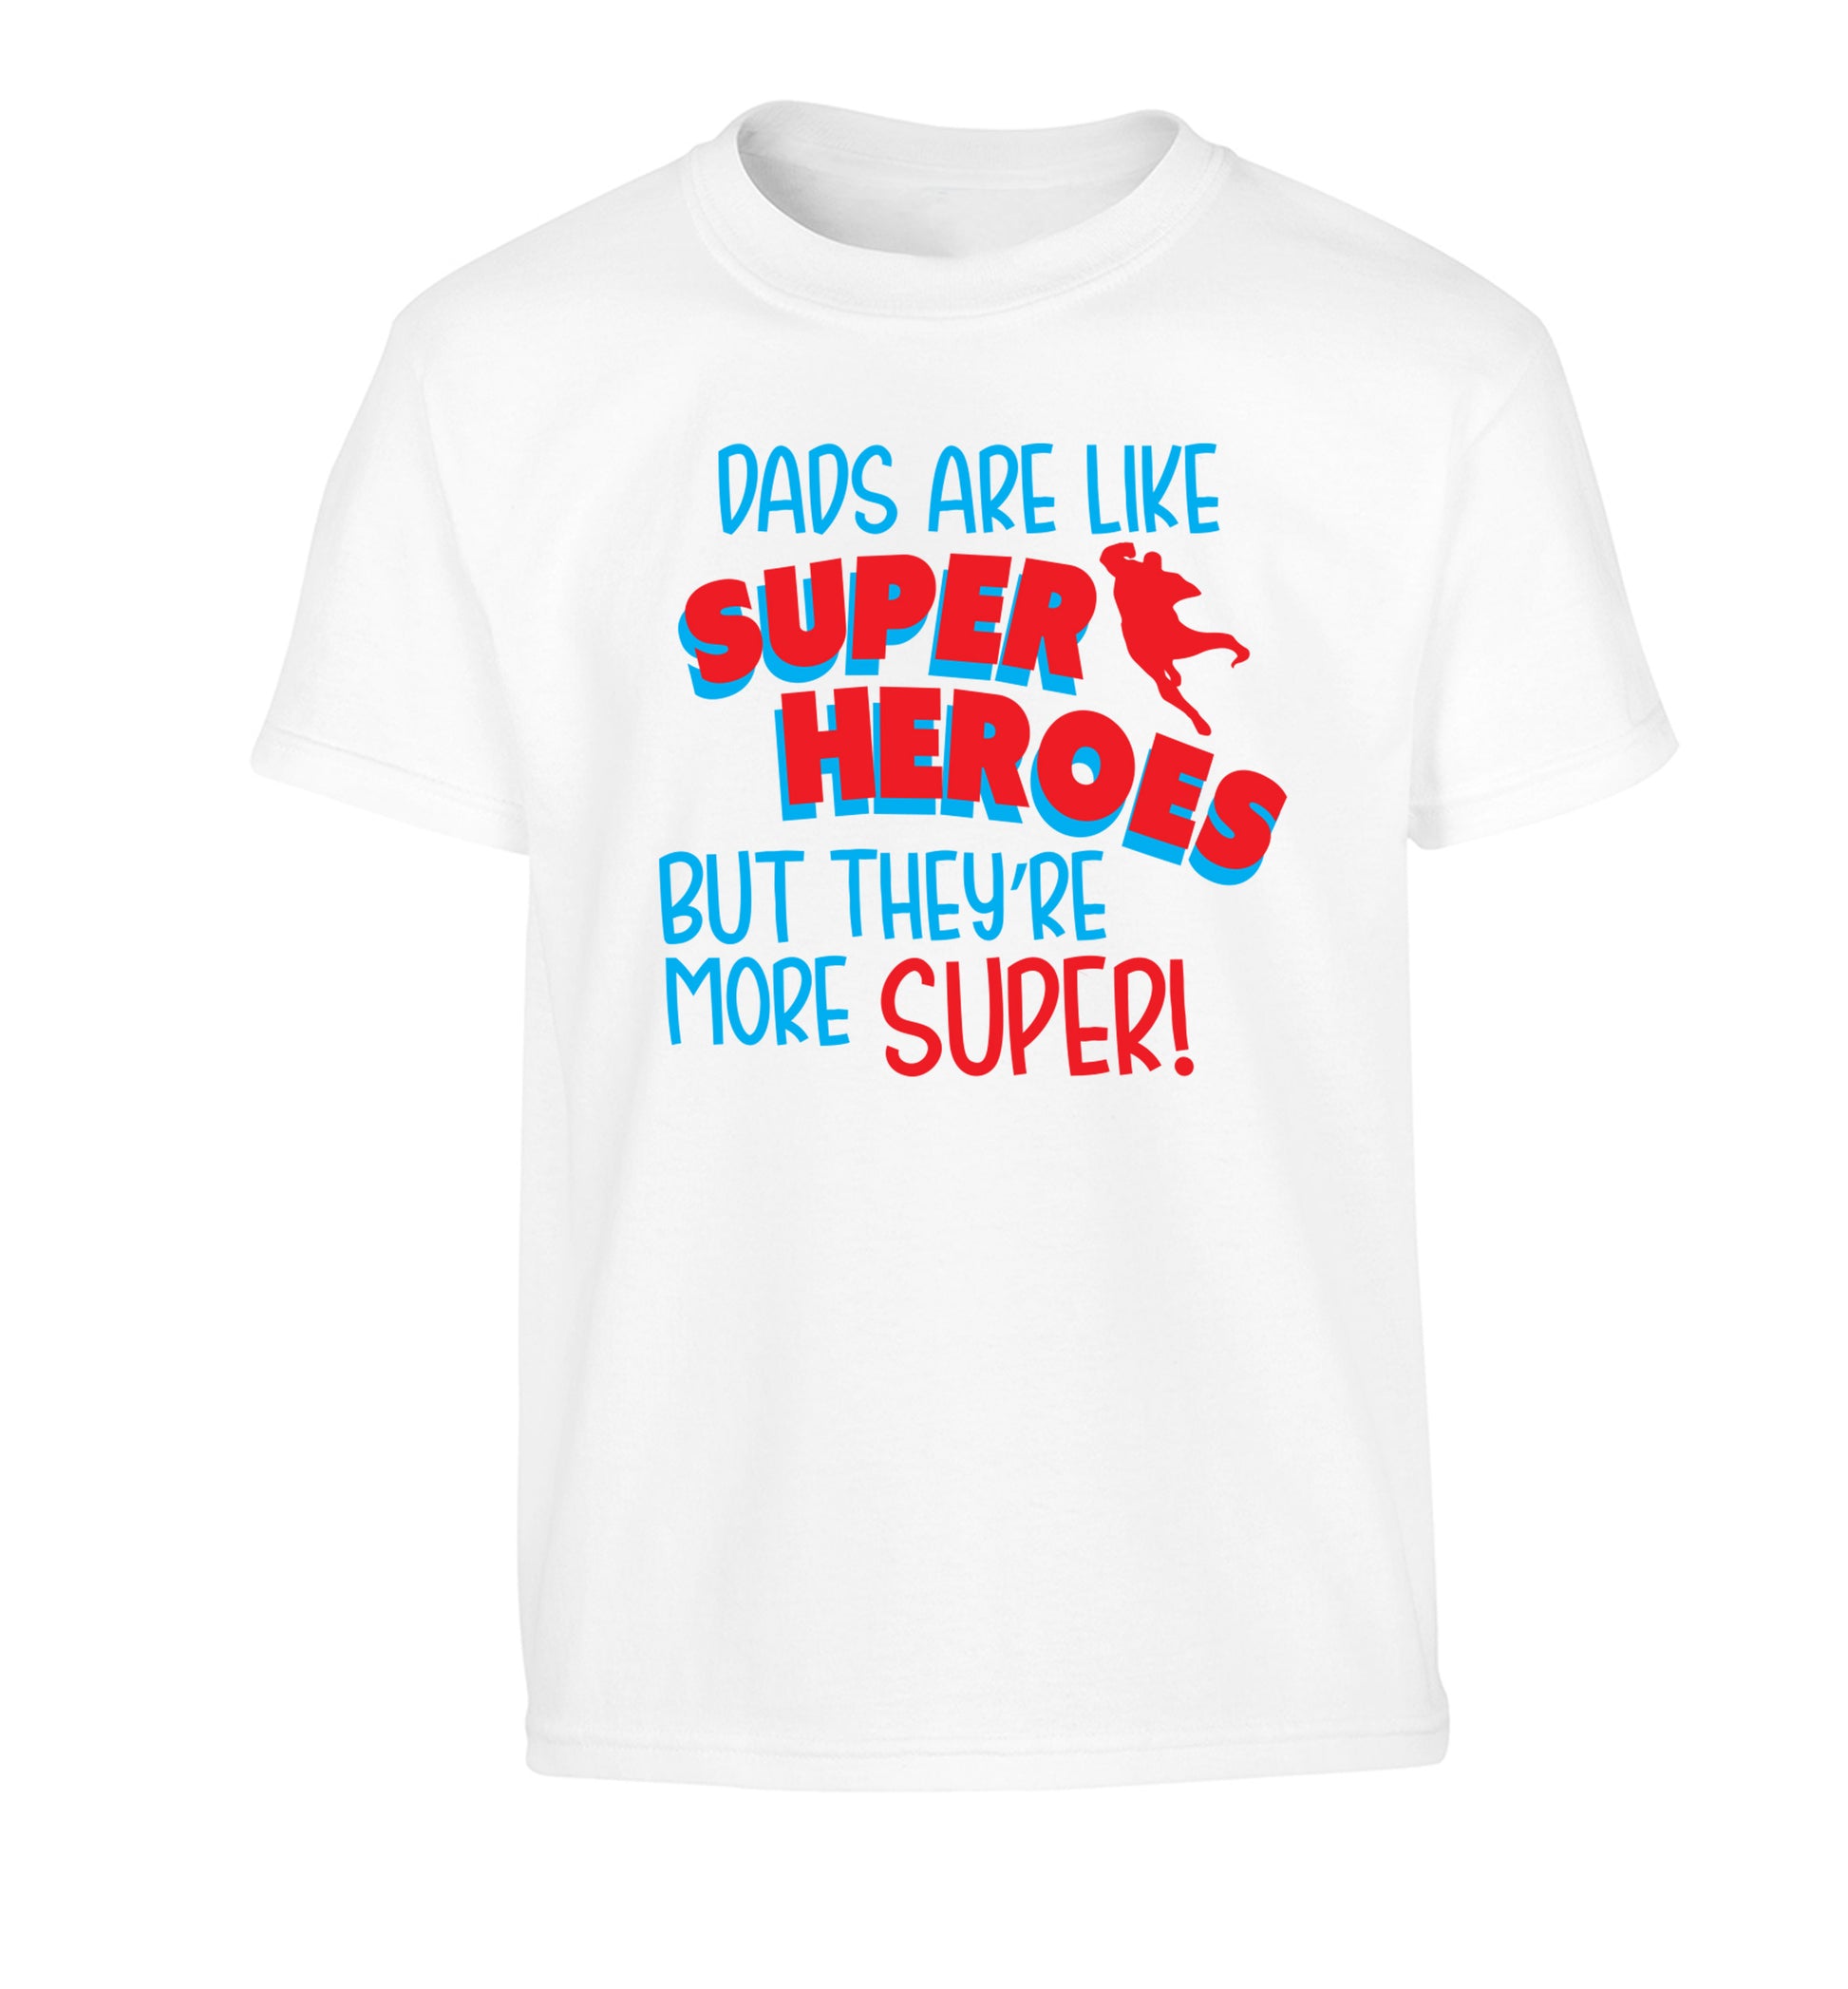 Dads are like superheros but they're more super Children's white Tshirt 12-13 Years